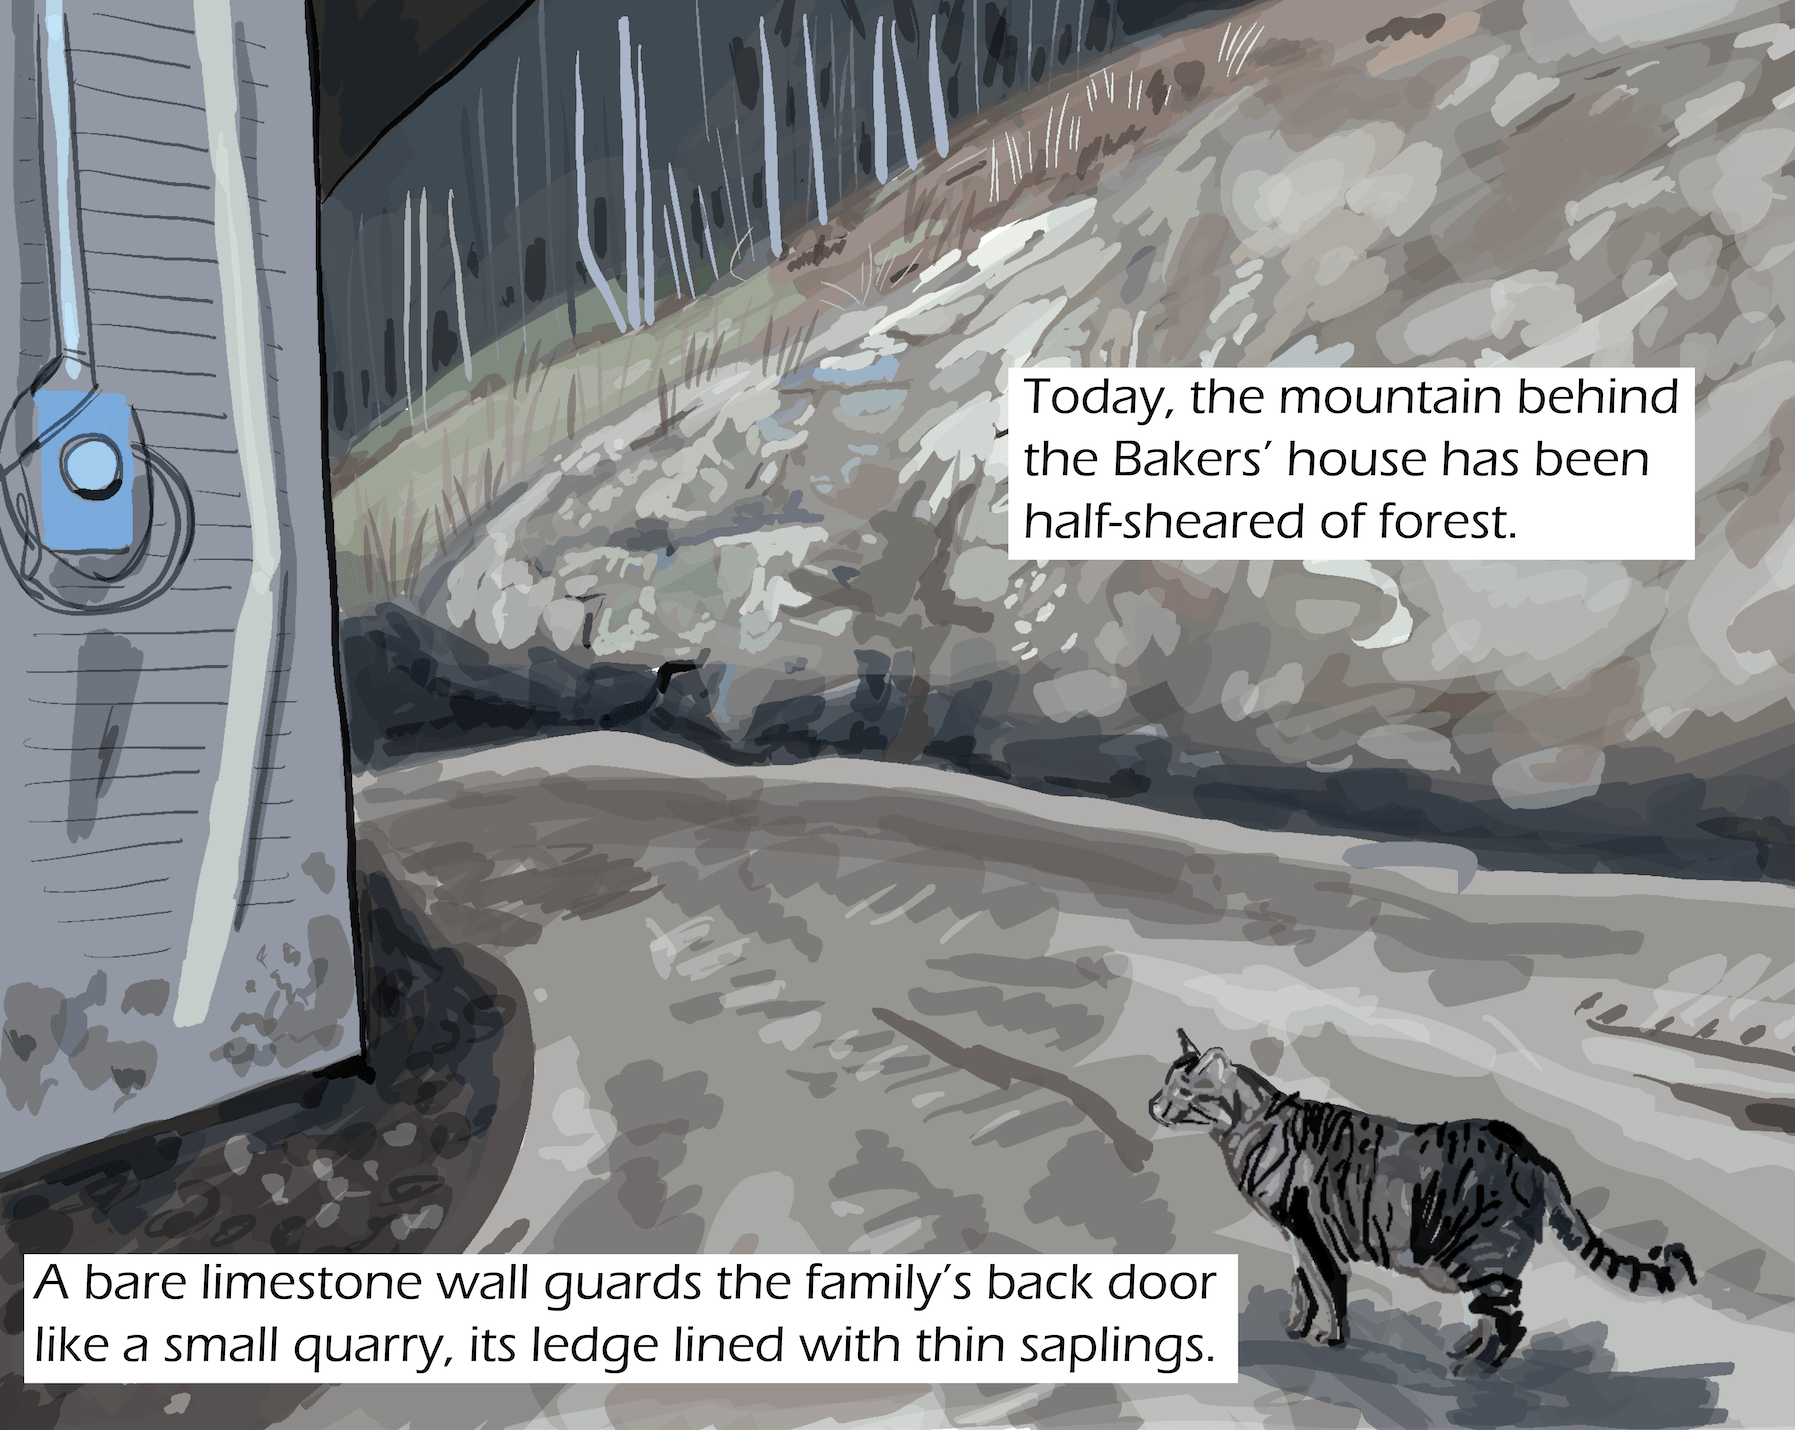 a black and brown striped cat stands near the side of a house in the woods Text: Today, the mountain behind the Bakers’ house has been half-sheared of forest. A bare limestone wall guards the family’s back door like a small quarry, its ledge lined with thin saplings.